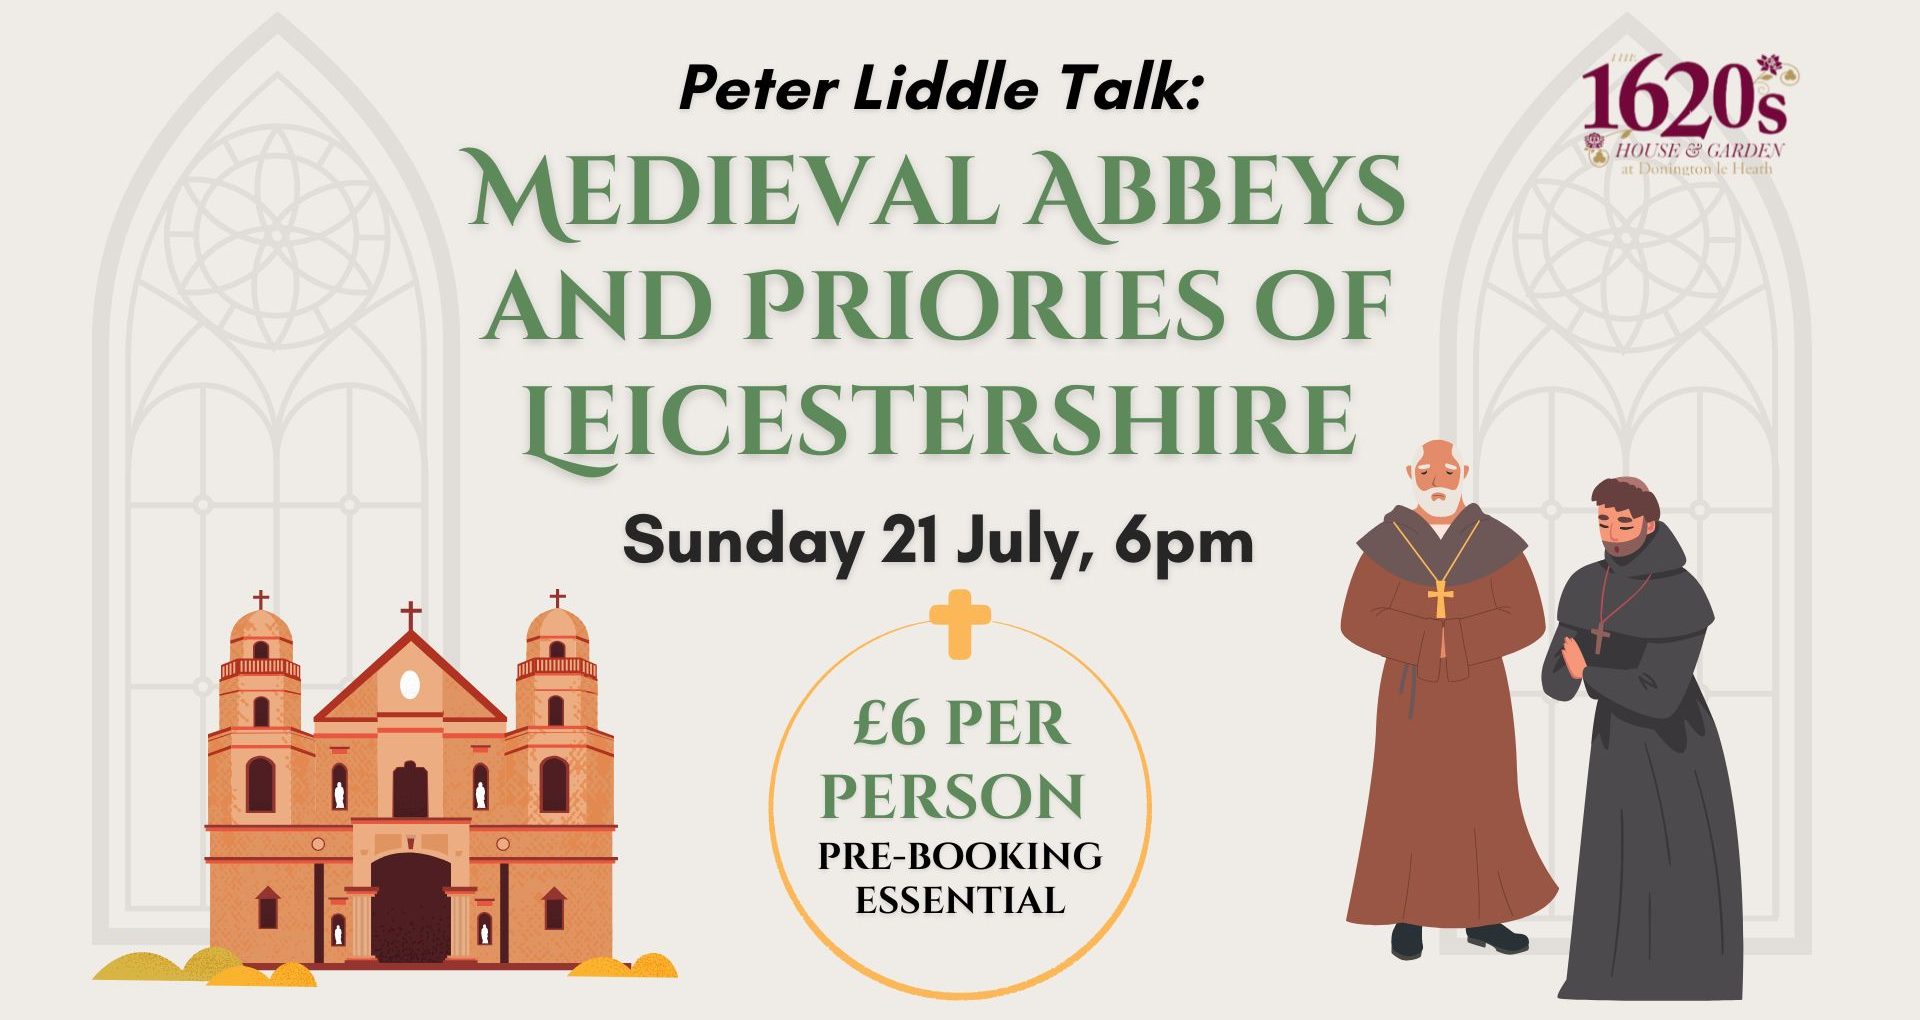 Medieval Abbeys and Priories of Leicestershire - Peter Liddle Talk